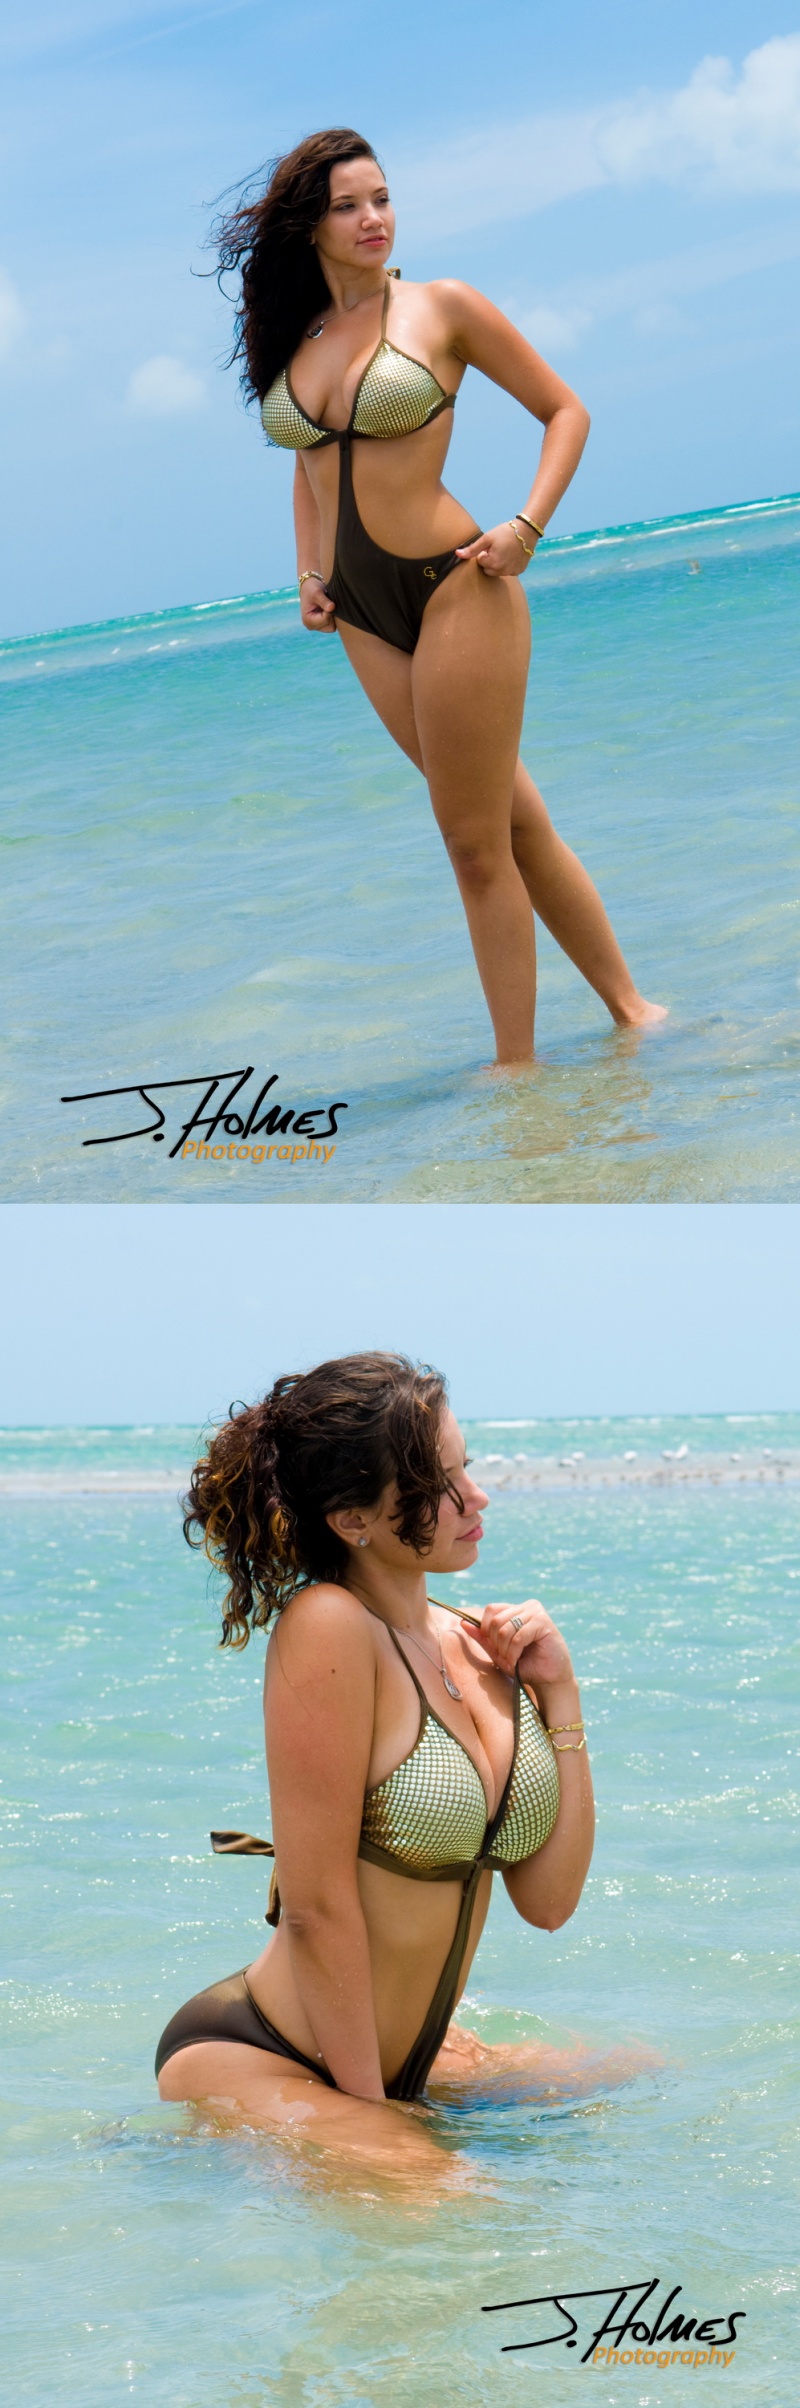 Male and Female model photo shoot of J Holmes Miami and Violet1234 in Miami